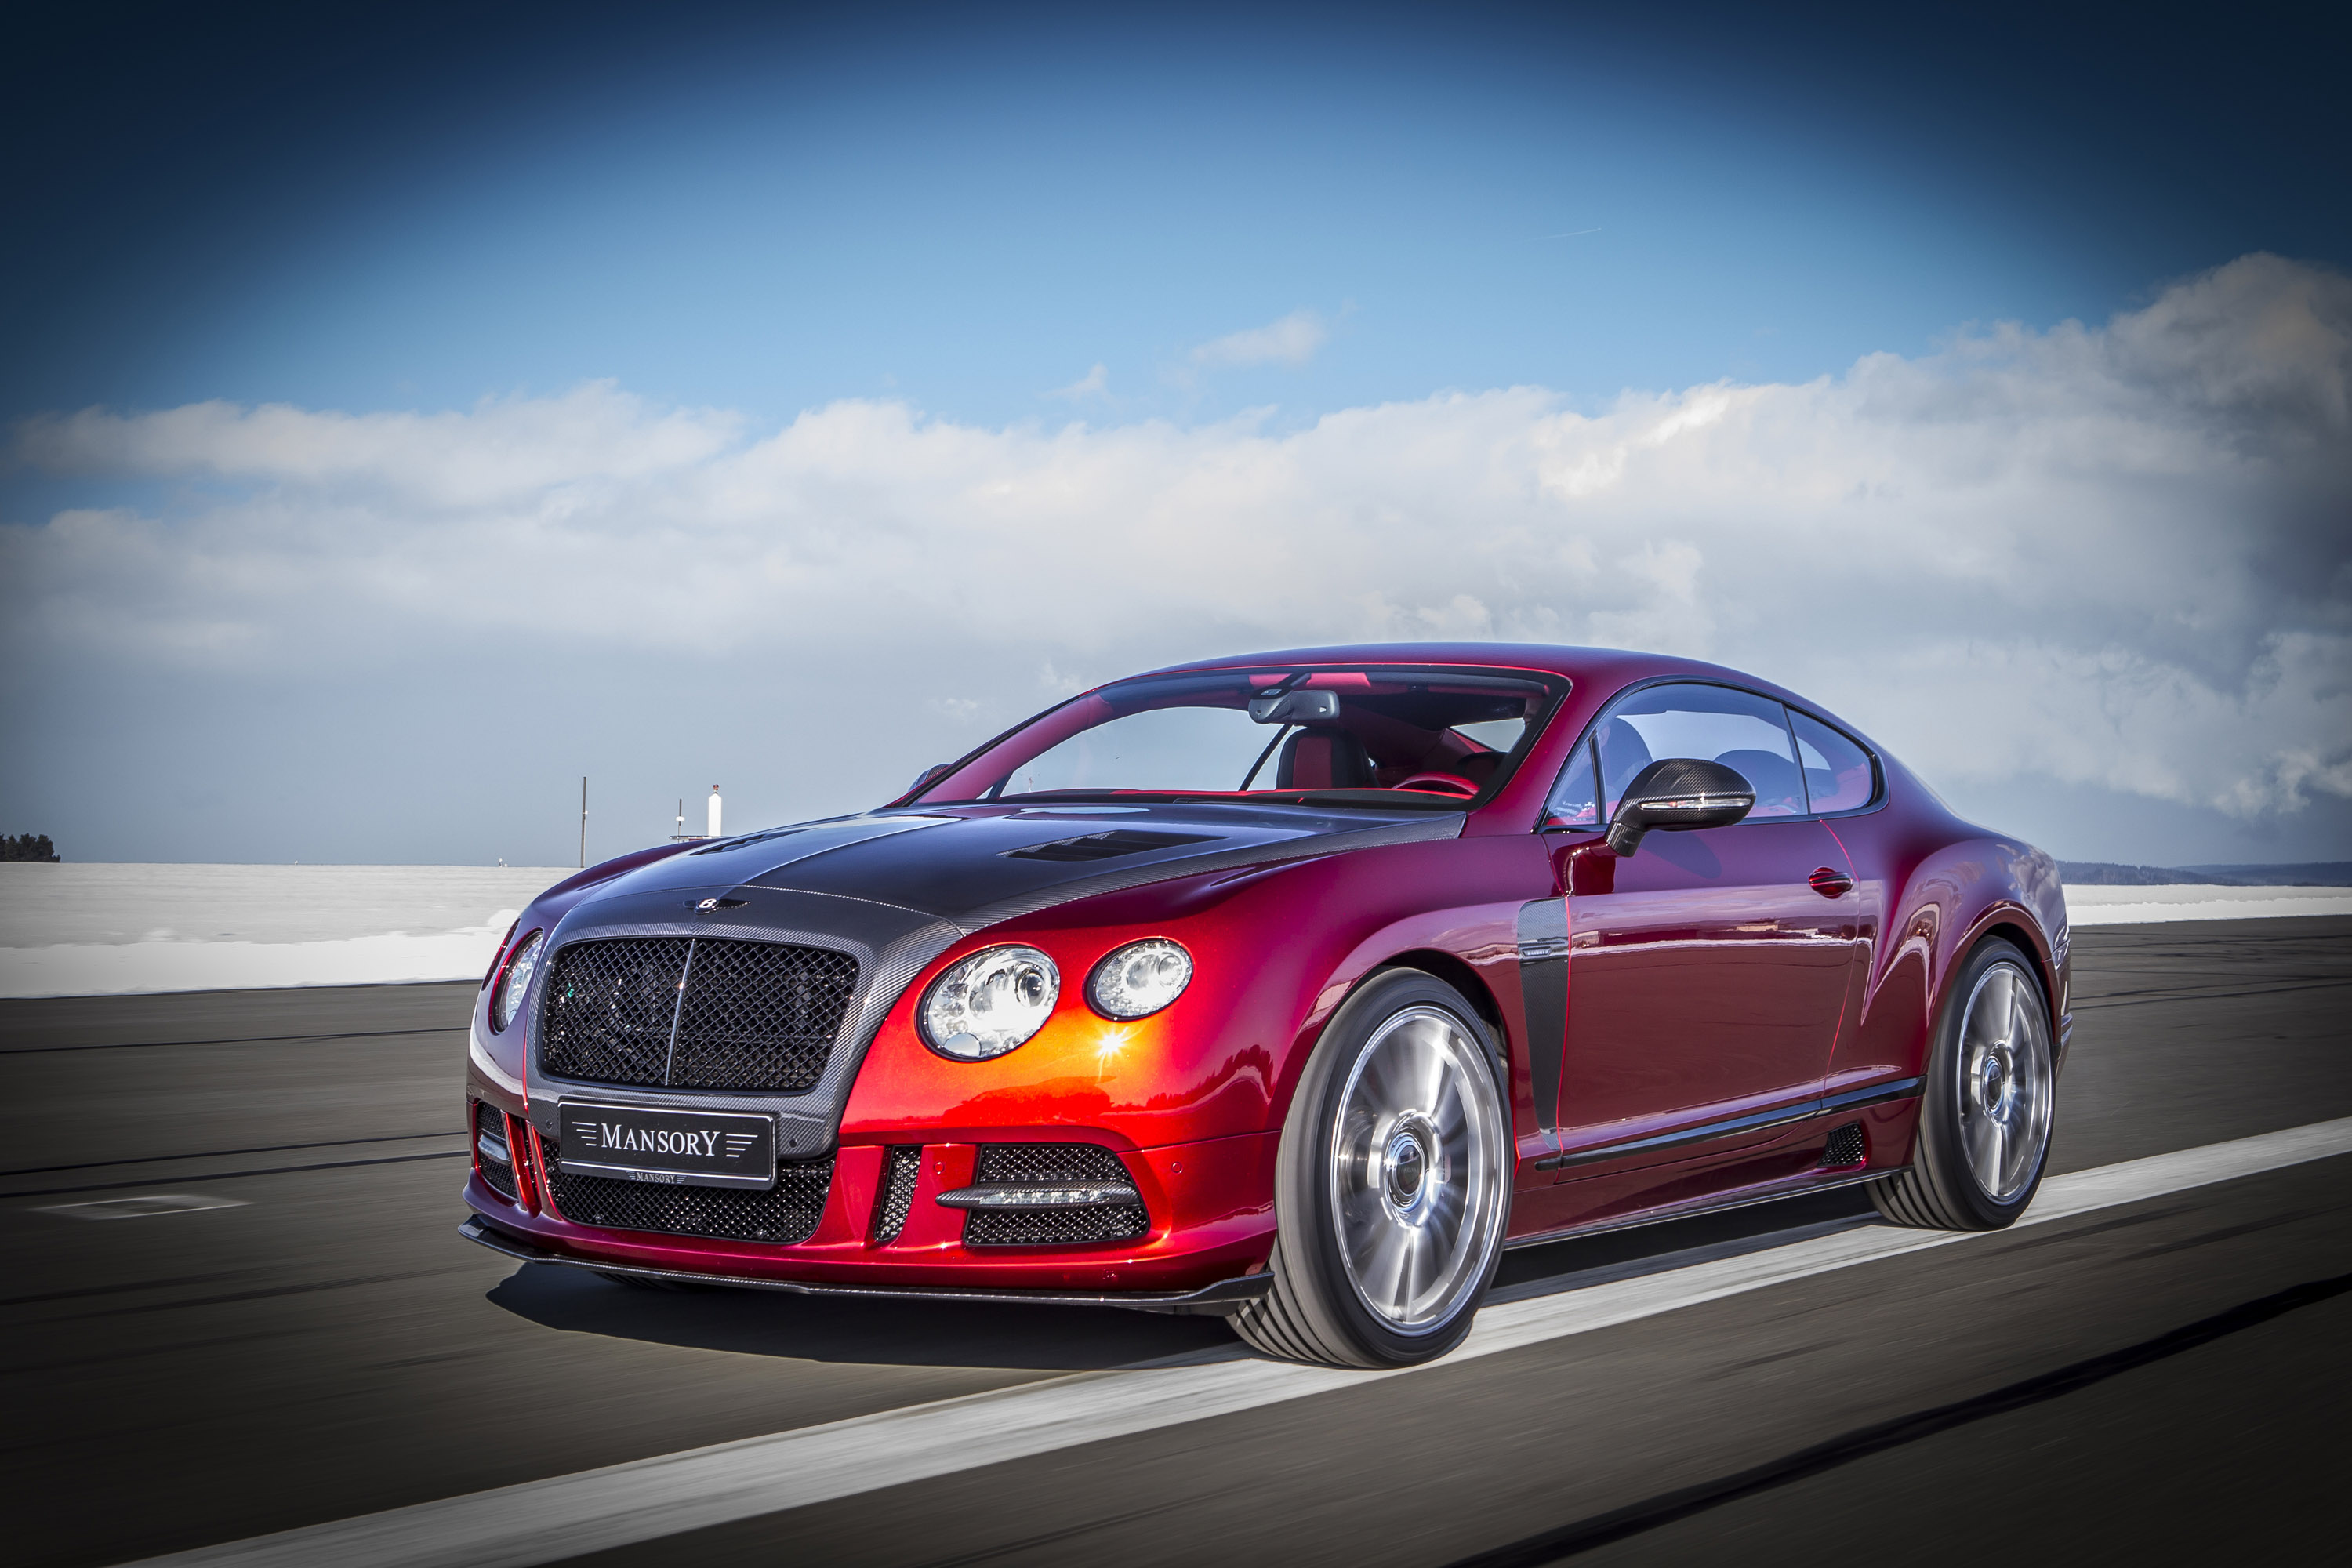 2013, Mansory, Sanguis, Bentley, Continental, Gt, Tuning, Luxury, Supercar, Supercars Wallpaper